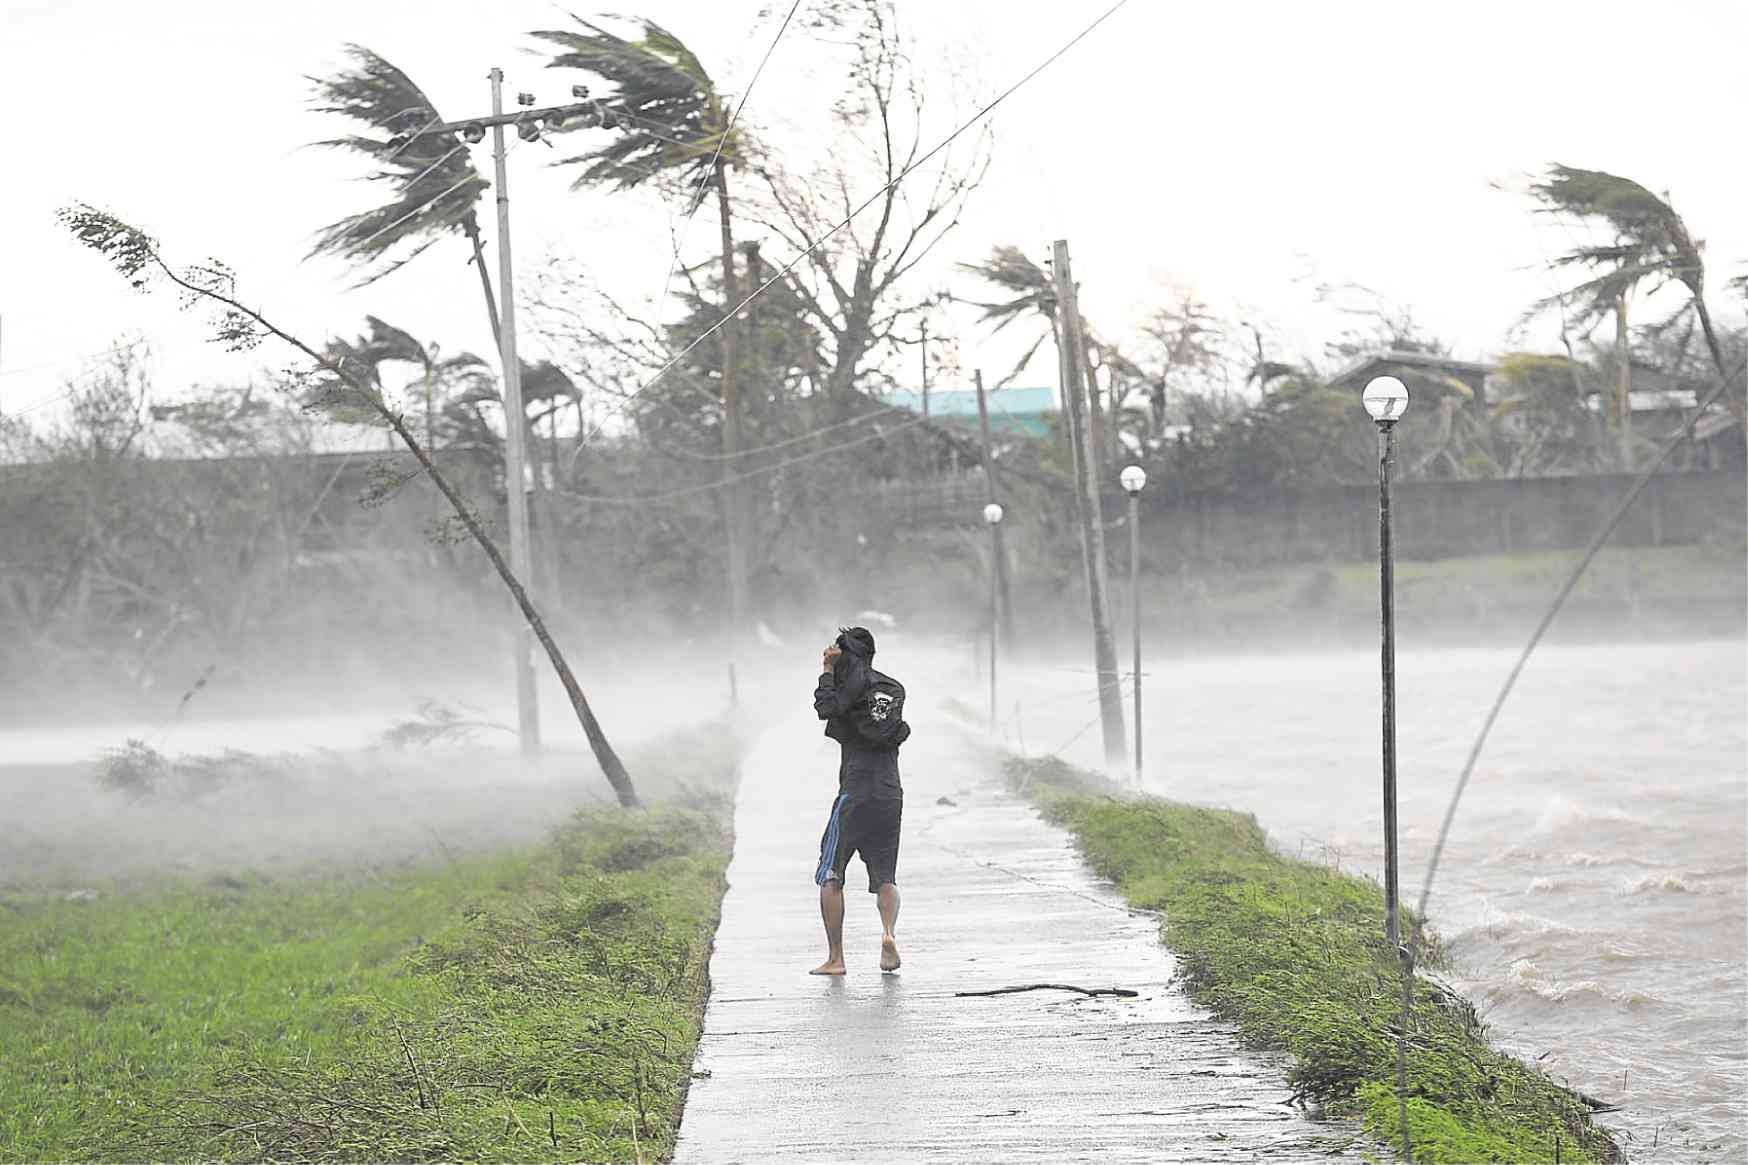 Pagasa's nationwide severe weather early warning system completed